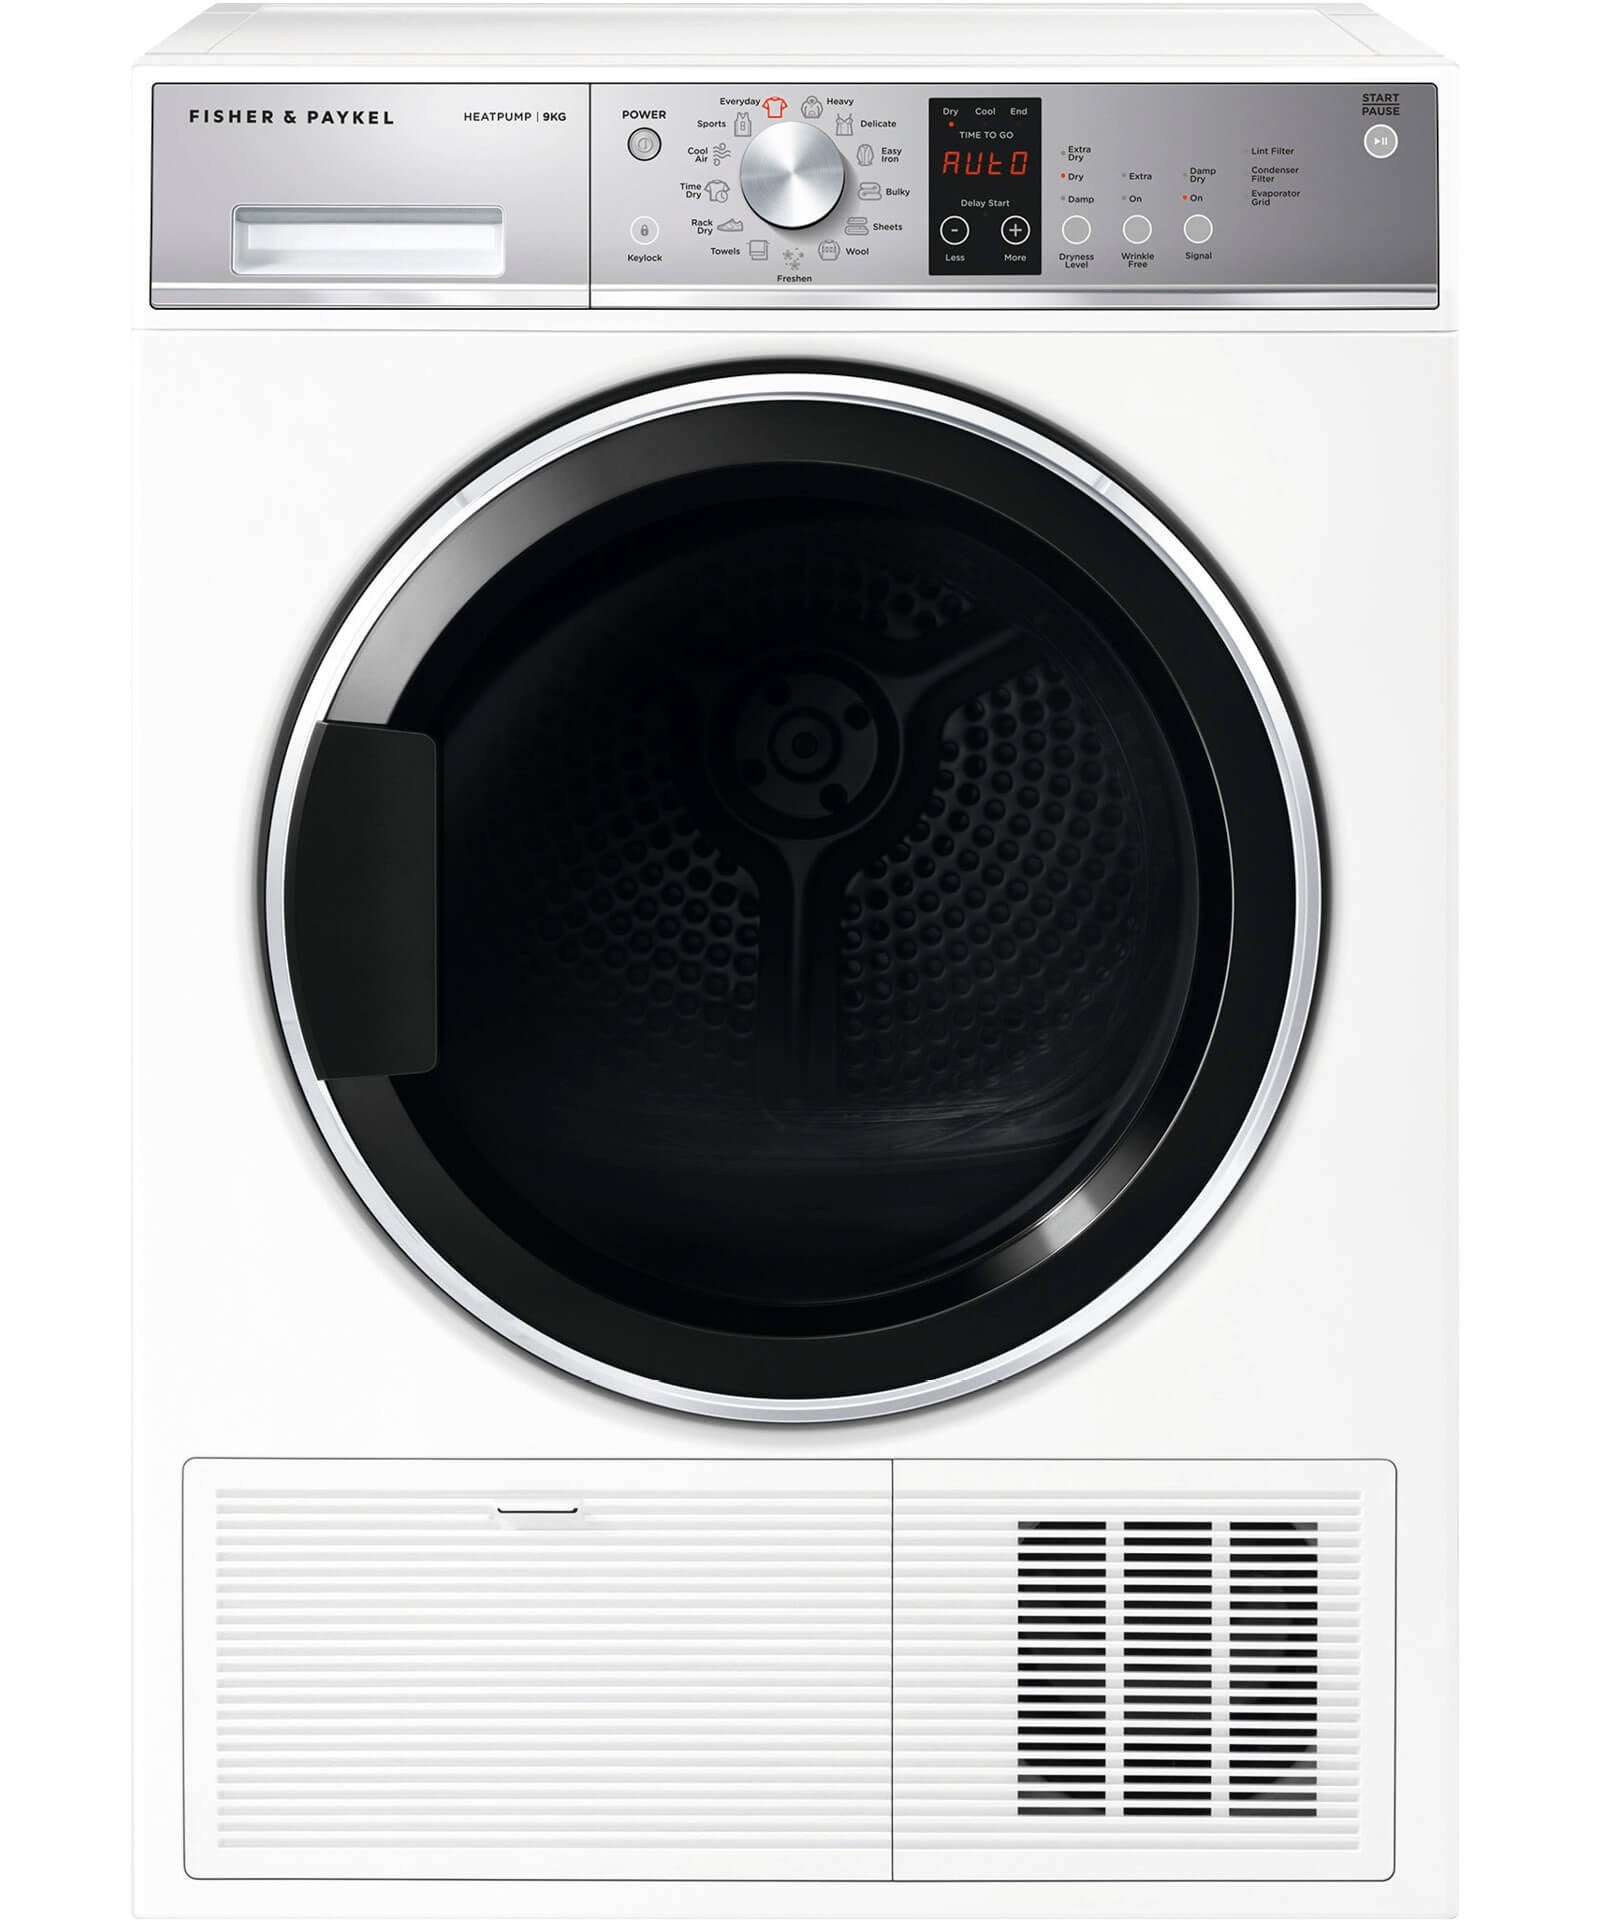 Fisher & Paykel DH9060P1 Dryer